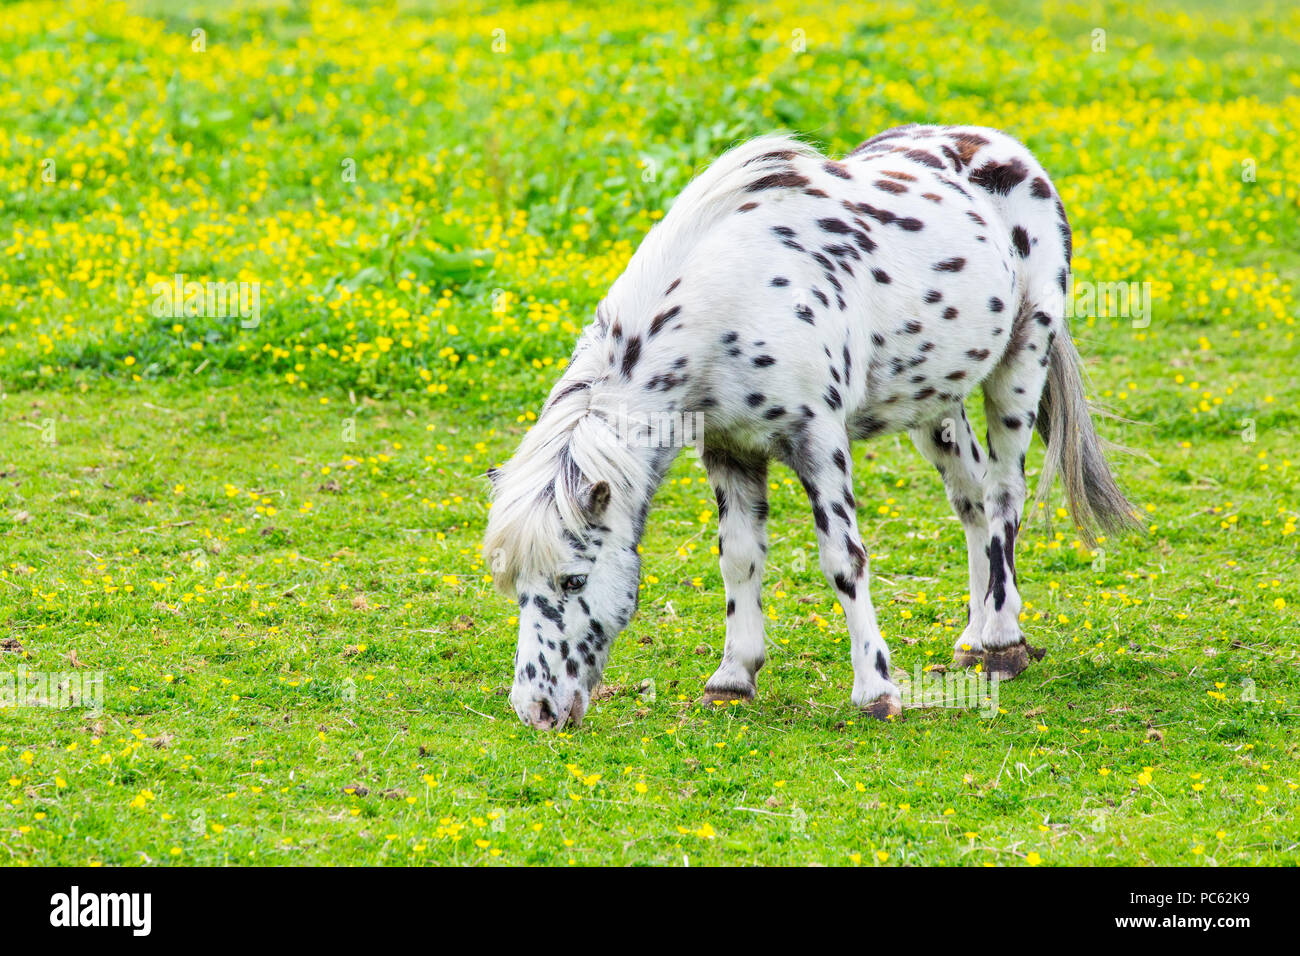 Black spotted white pony eating grass in flowering pasture Stock Photo